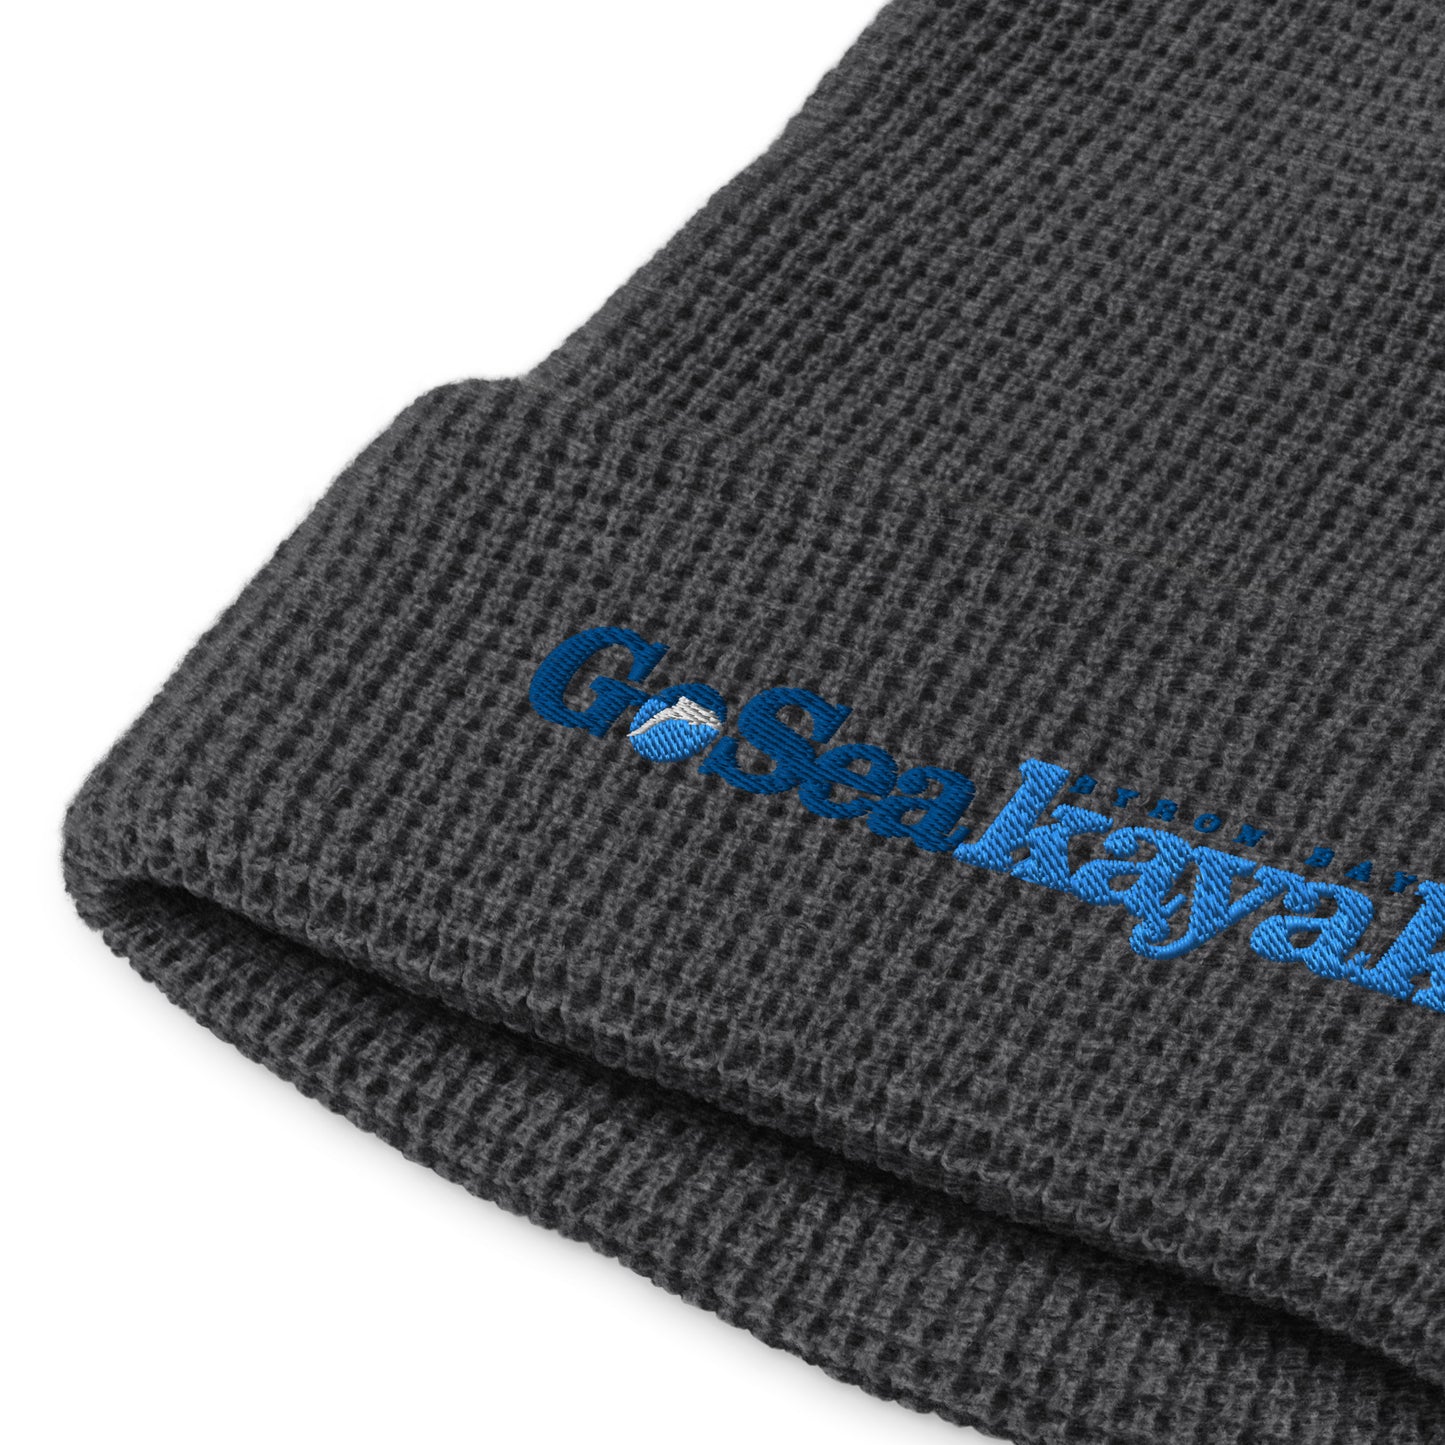  Waffle Beanie - Heather charcoal - Close up of embroidered logo and waffle material - Go Sea Kayak Byron bay logo on front - Genuine Byron Bay Merchandise | Produced by Go Sea Kayak Byron Bay 